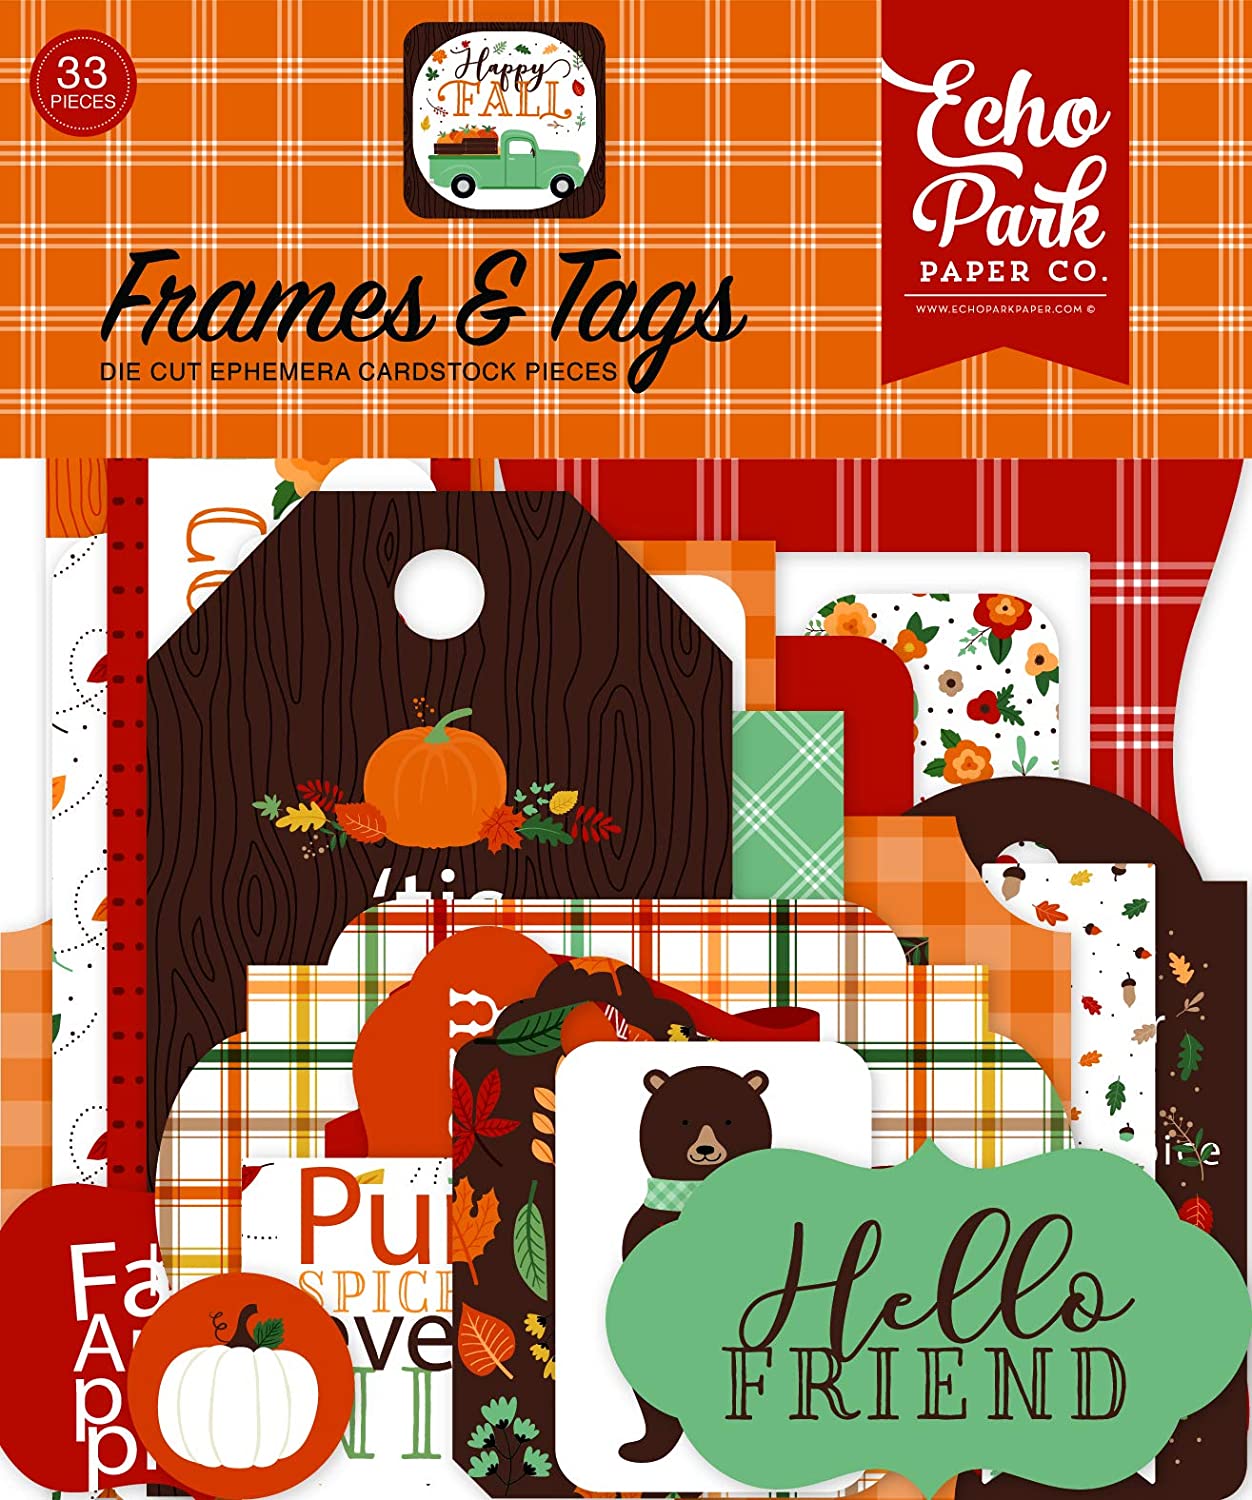 Happy Fall Frames and Tags Die Cuts